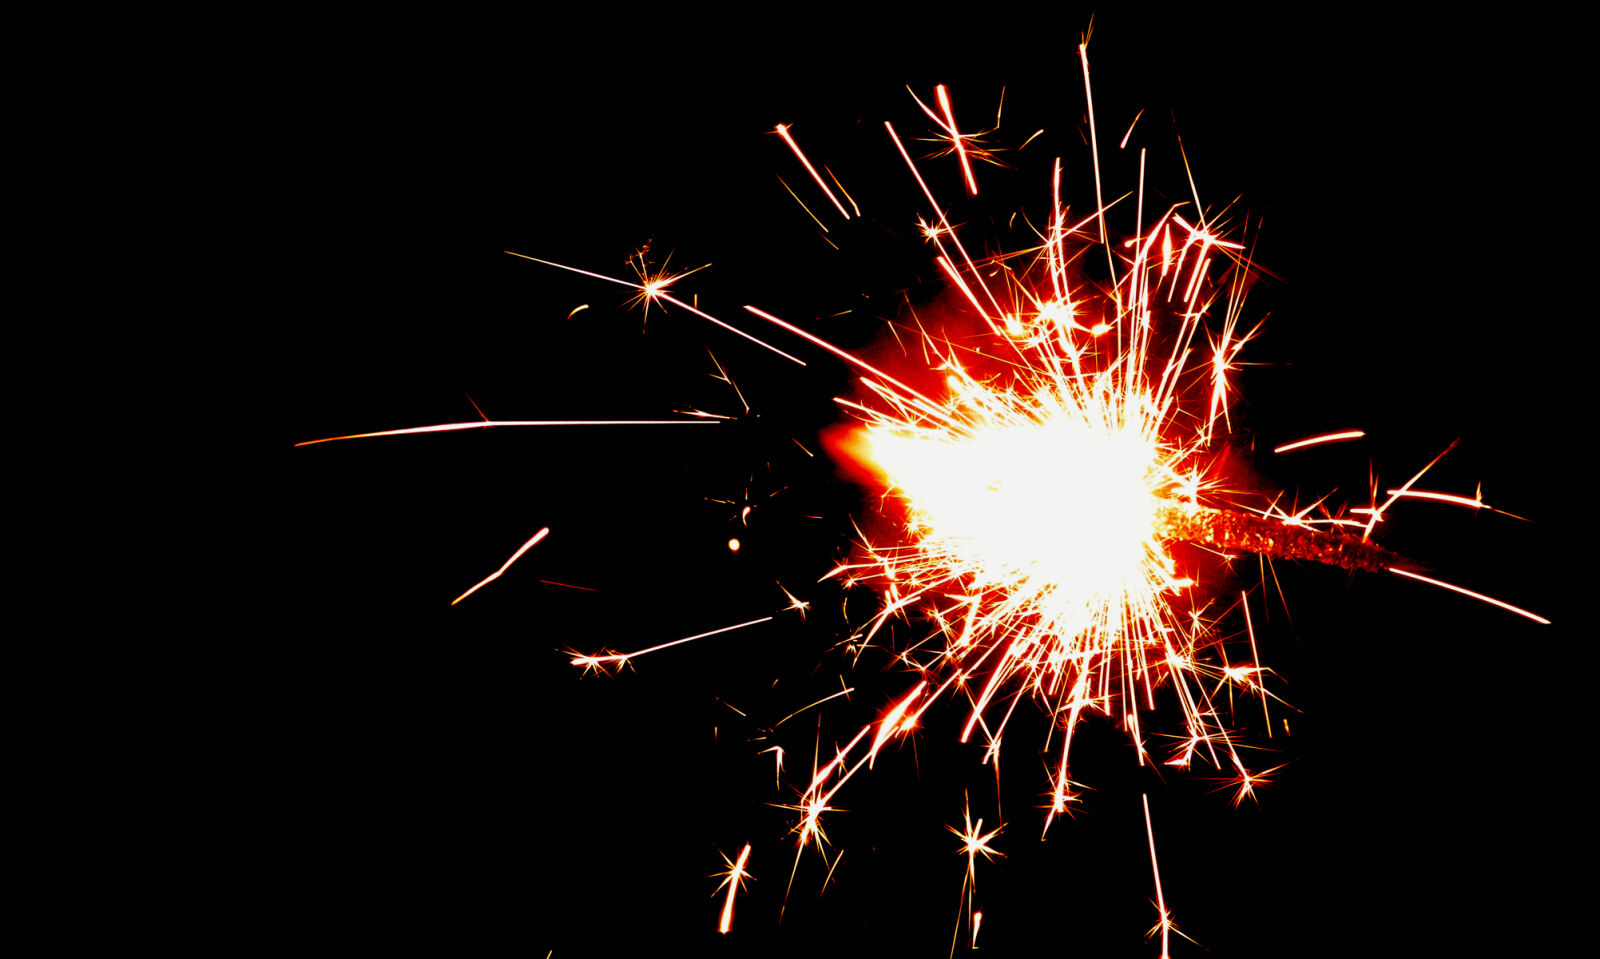 Nikon Coolpix L120 sample photo. Fire, cracker, spark, in photography